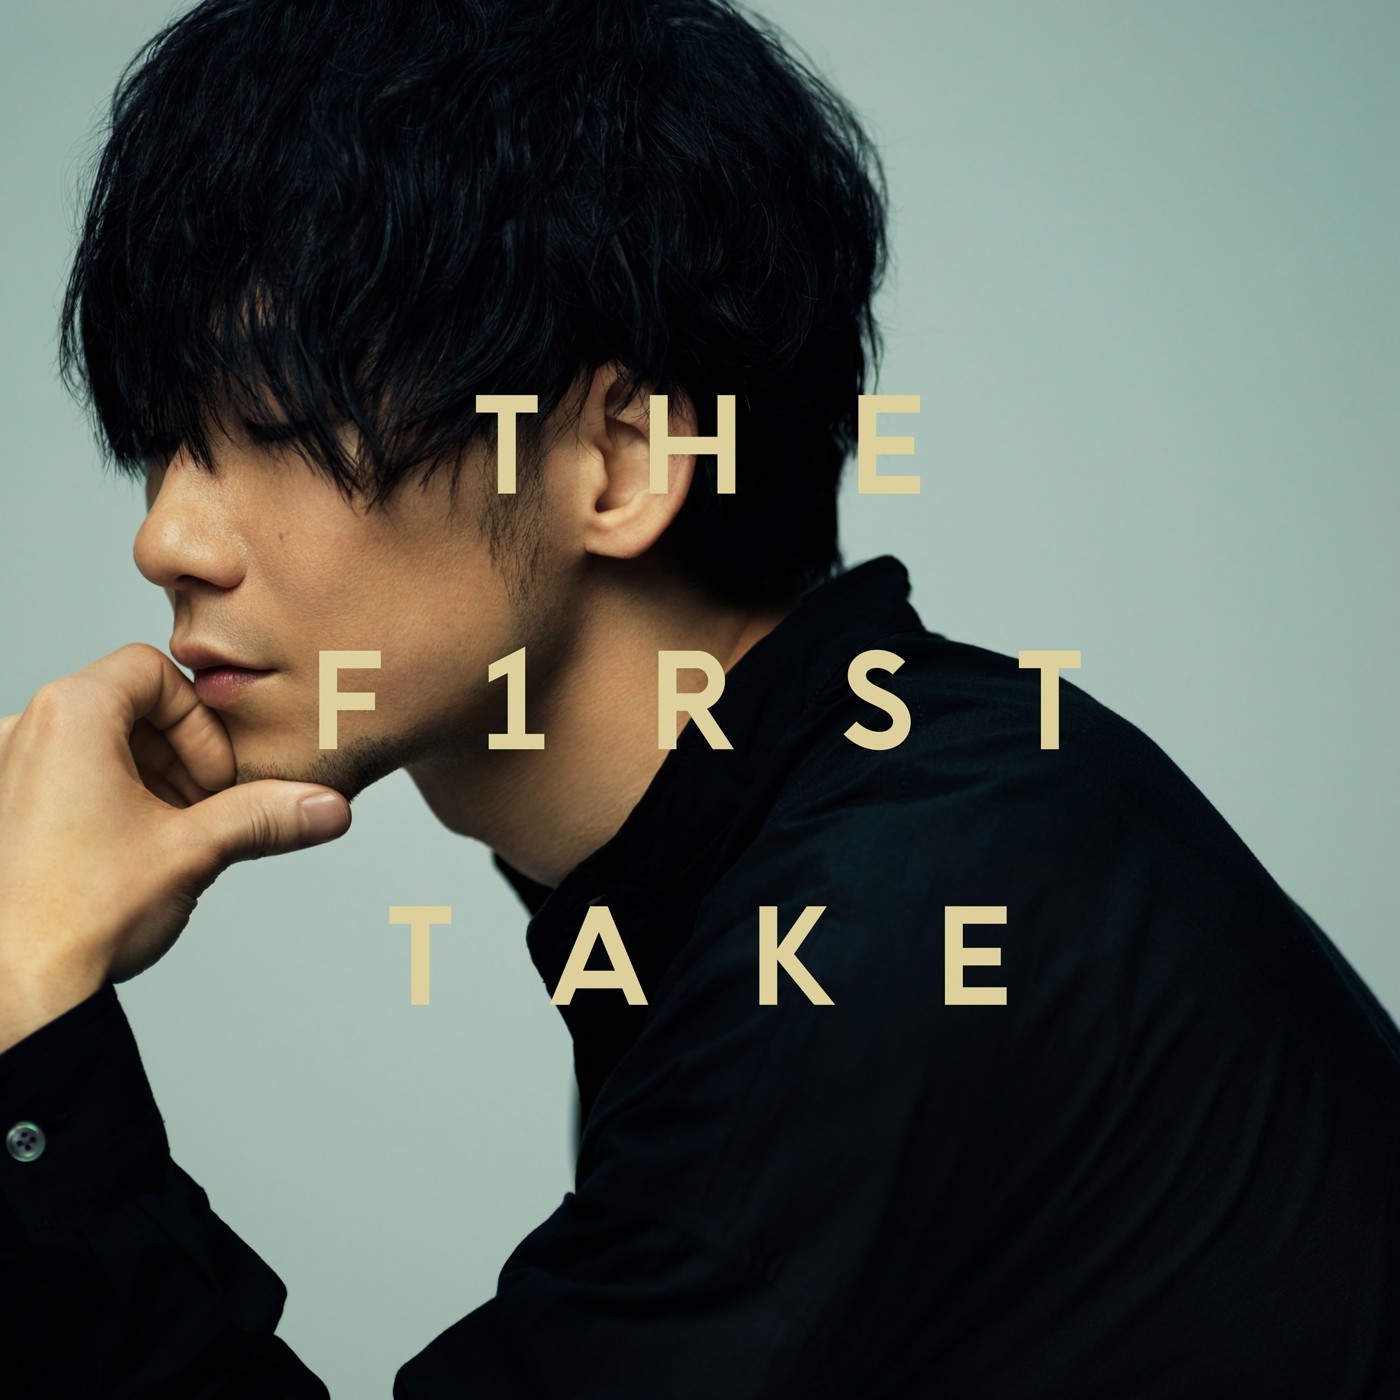 TK from 凛として時雨 – unravel – From THE FIRST TAKE [24bit Lossless + MP3 VBR / WEB] [2020.07.24]